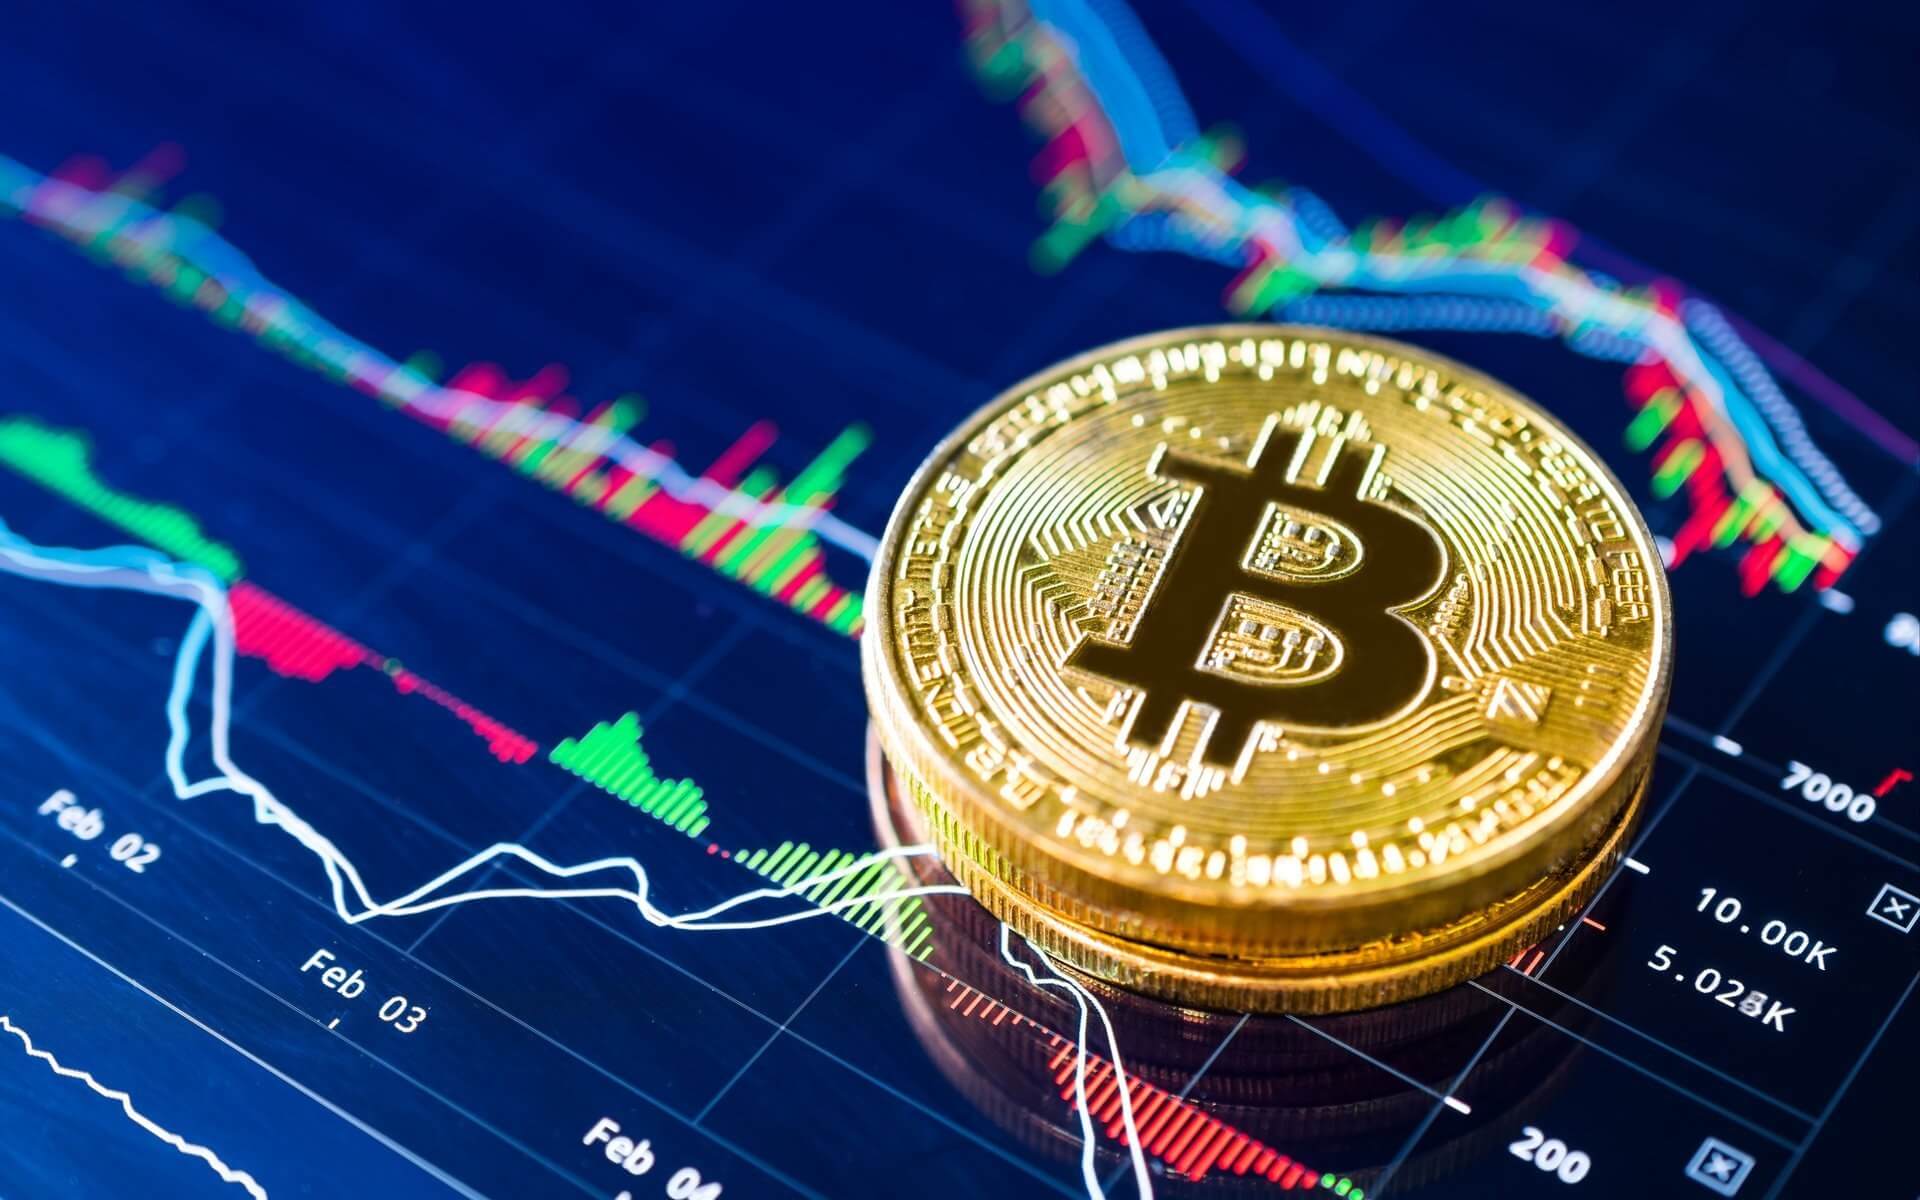 Bitcoin sets new low for the year dropping under $6,000